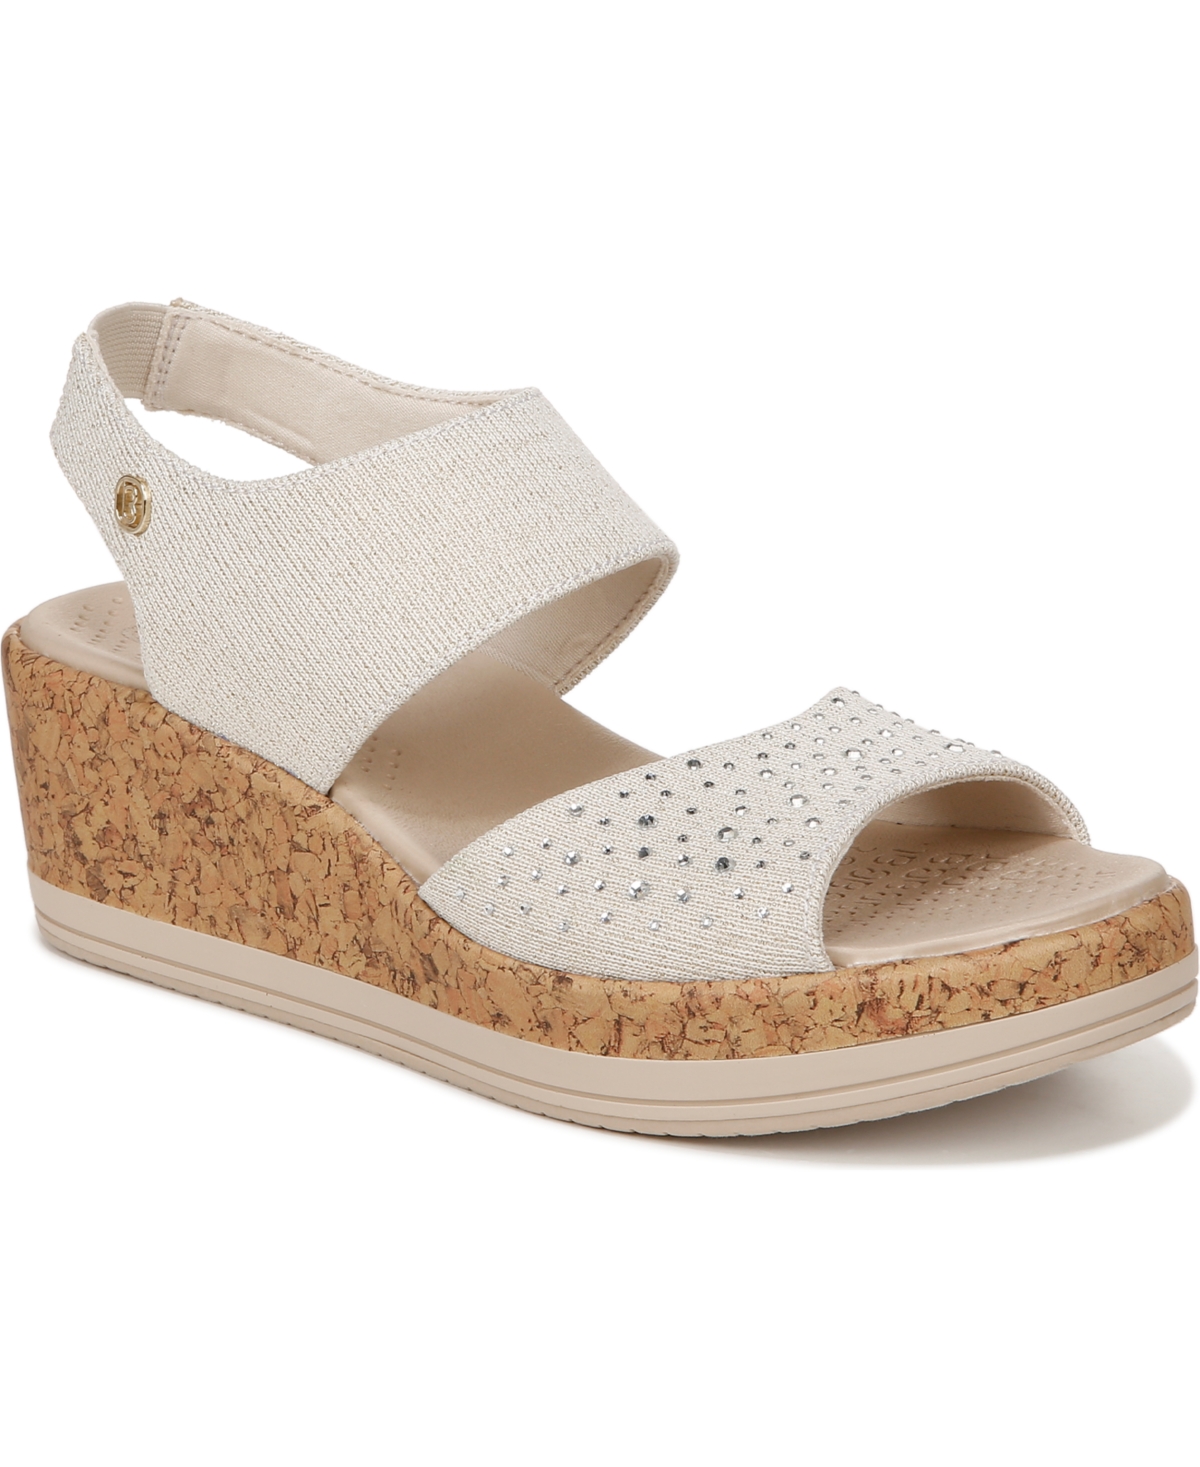 Reveal-Bright Washable Slingback Wedge Sandals - White Fabric